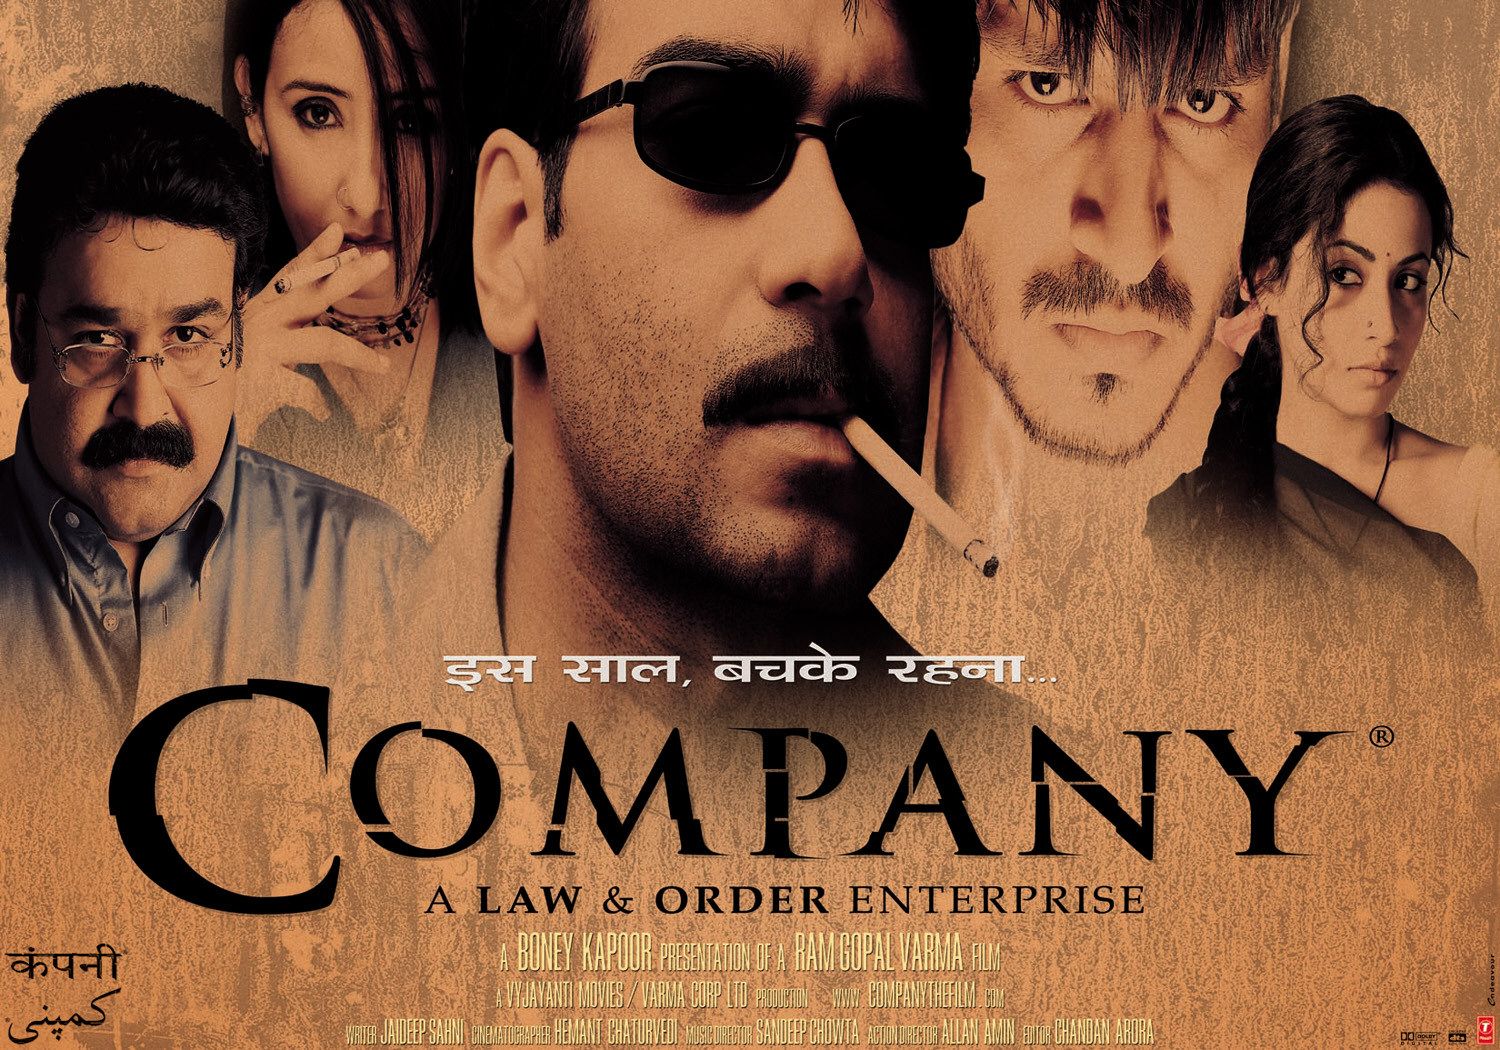 http://www.impawards.com/intl/india/2002/posters/company_ver9_xlg.jpg